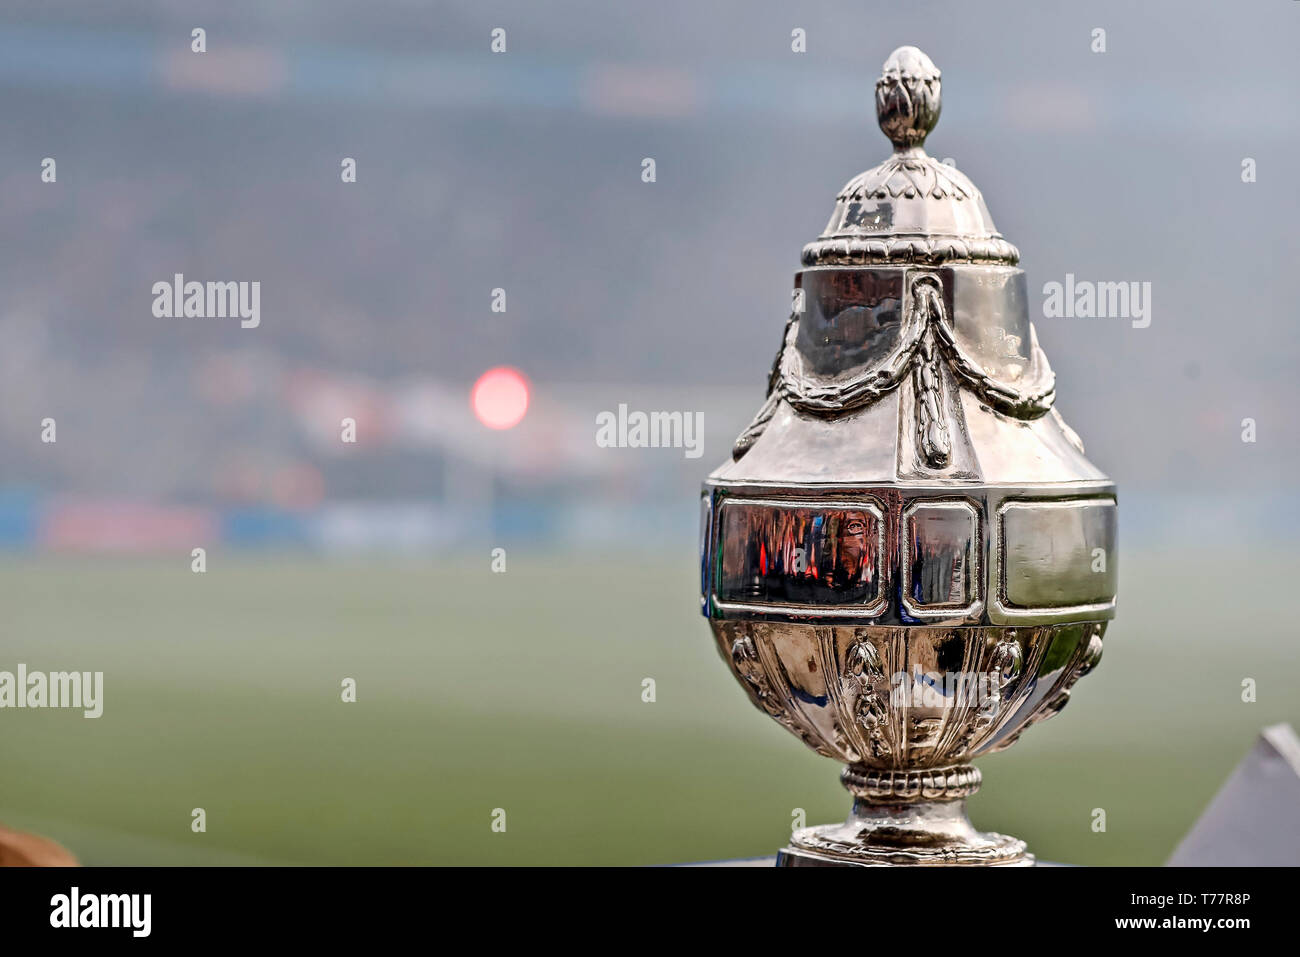 Toto knvb beker hi-res stock photography and images - Alamy